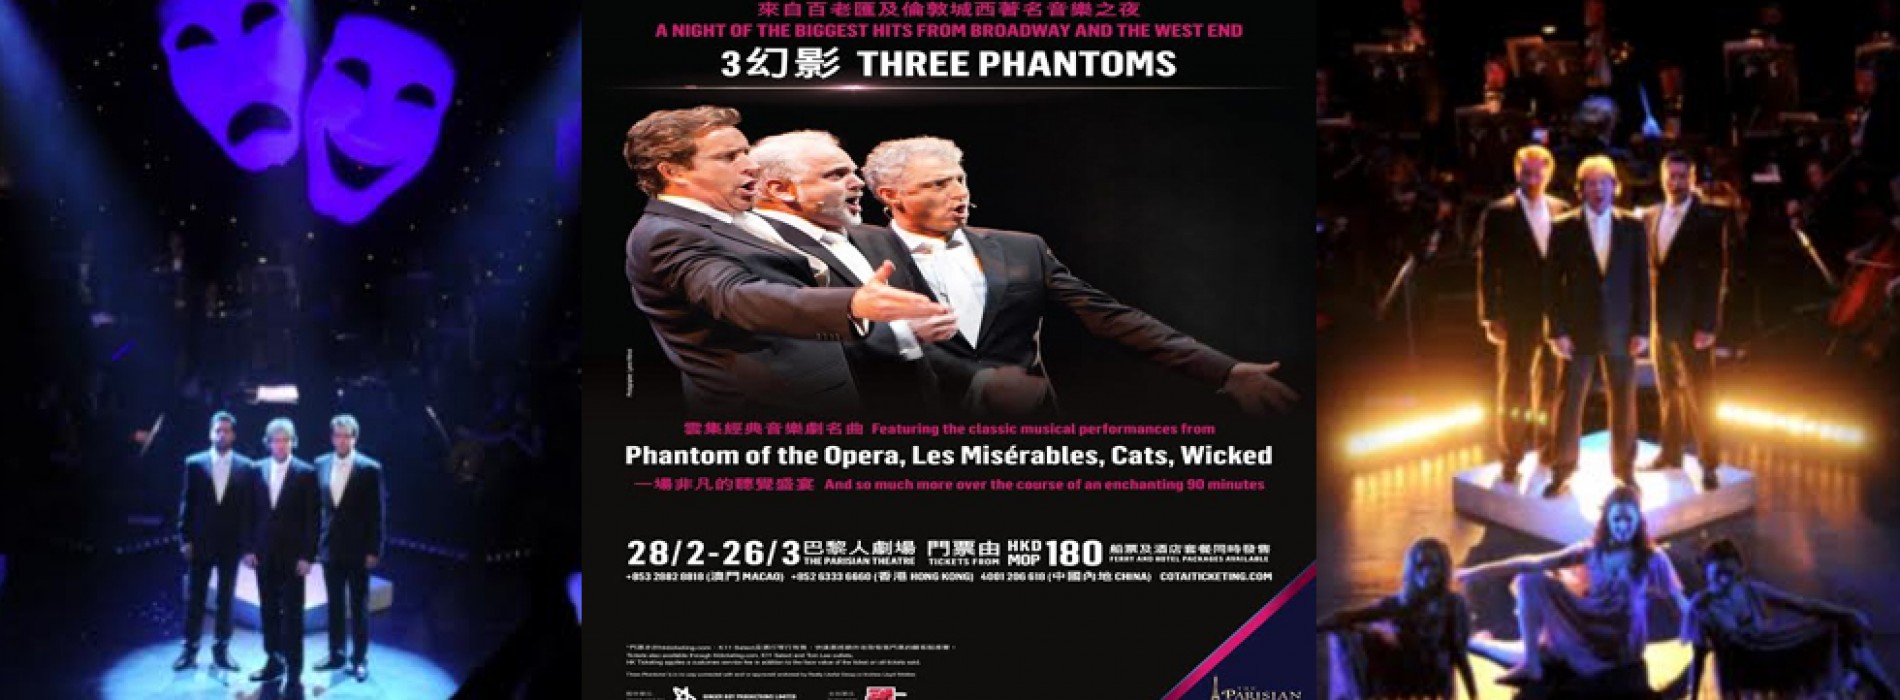 Three Phantoms to bring world-class evening of musical theatre to the Parisian Macao